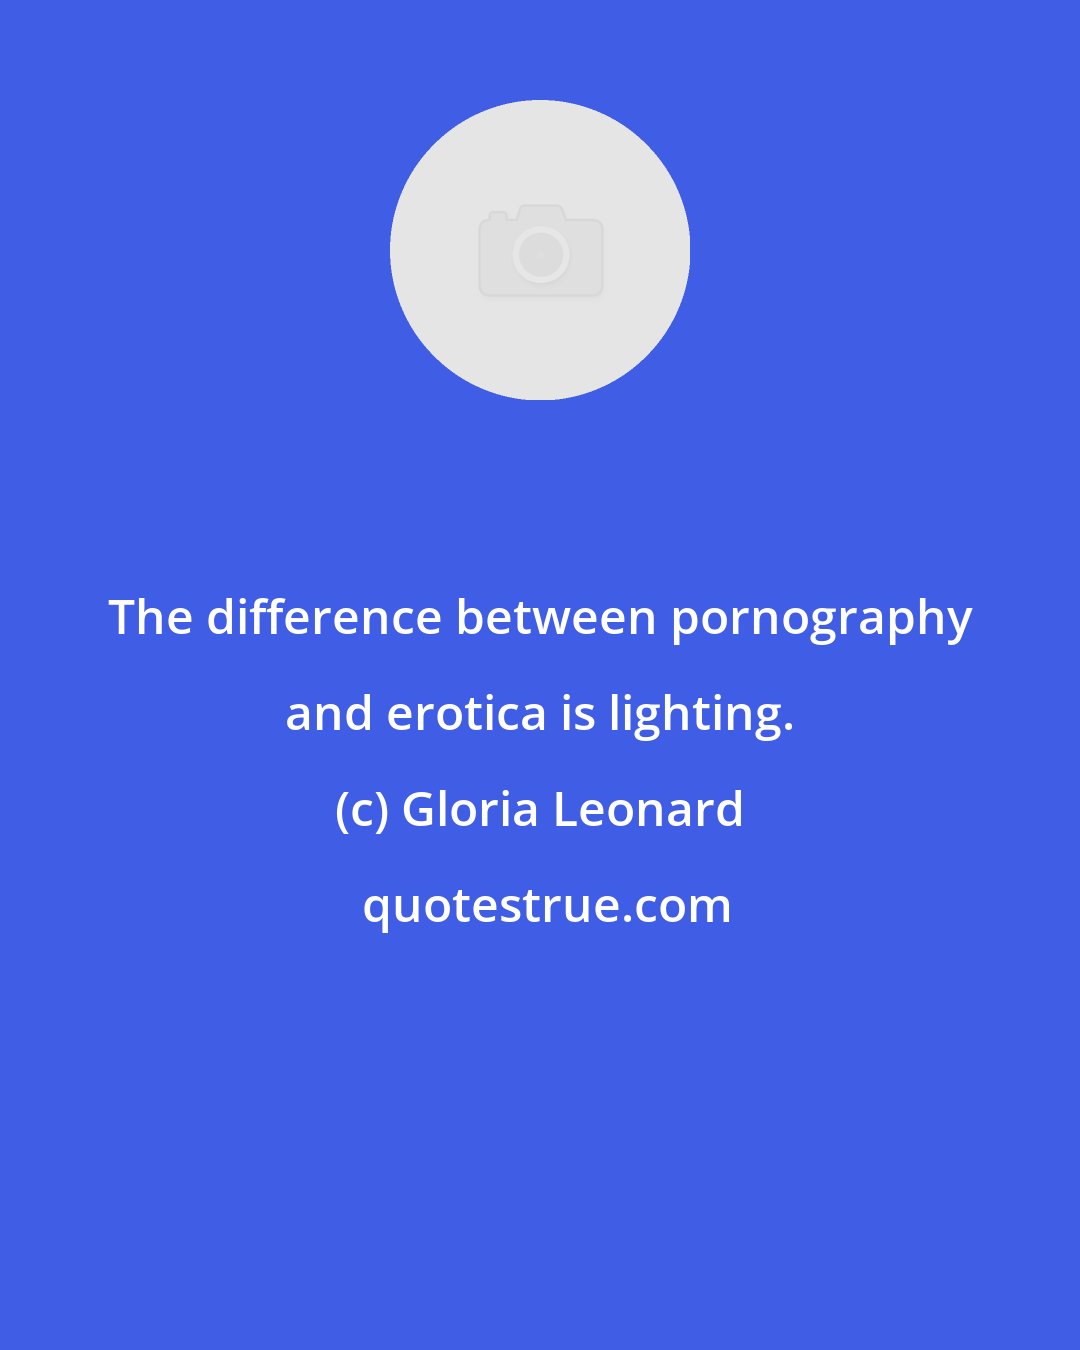 Gloria Leonard: The difference between pornography and erotica is lighting.